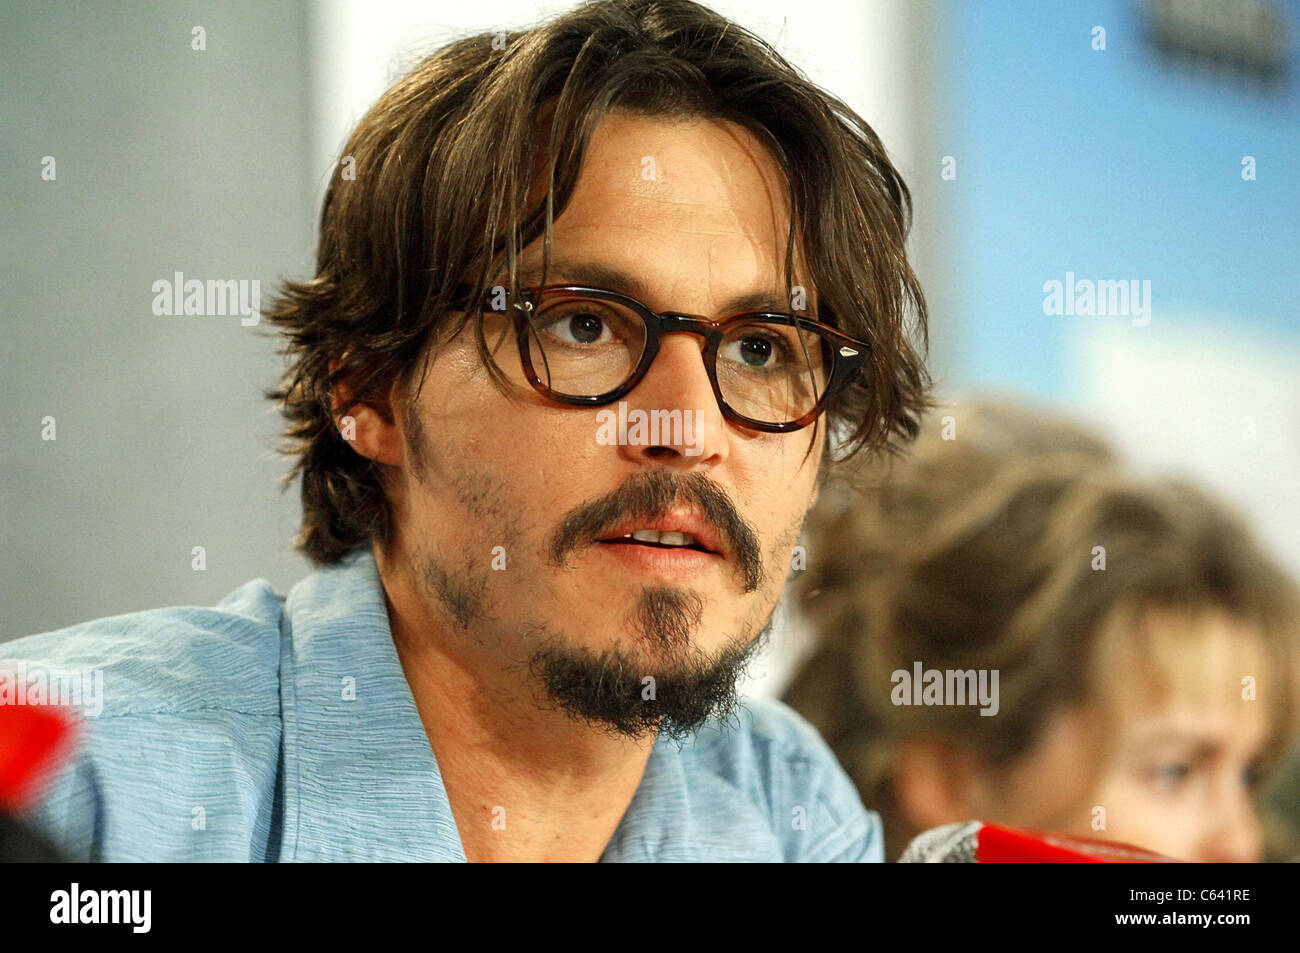 Johnny Depp at arrivals for Corpse Bride Press Conference at Toronto Film Festival, Sutton Place Hotel, Toronto, ON, September 10, 2005. Photo by: Tom Sandler/Everett Collection Stock Photo